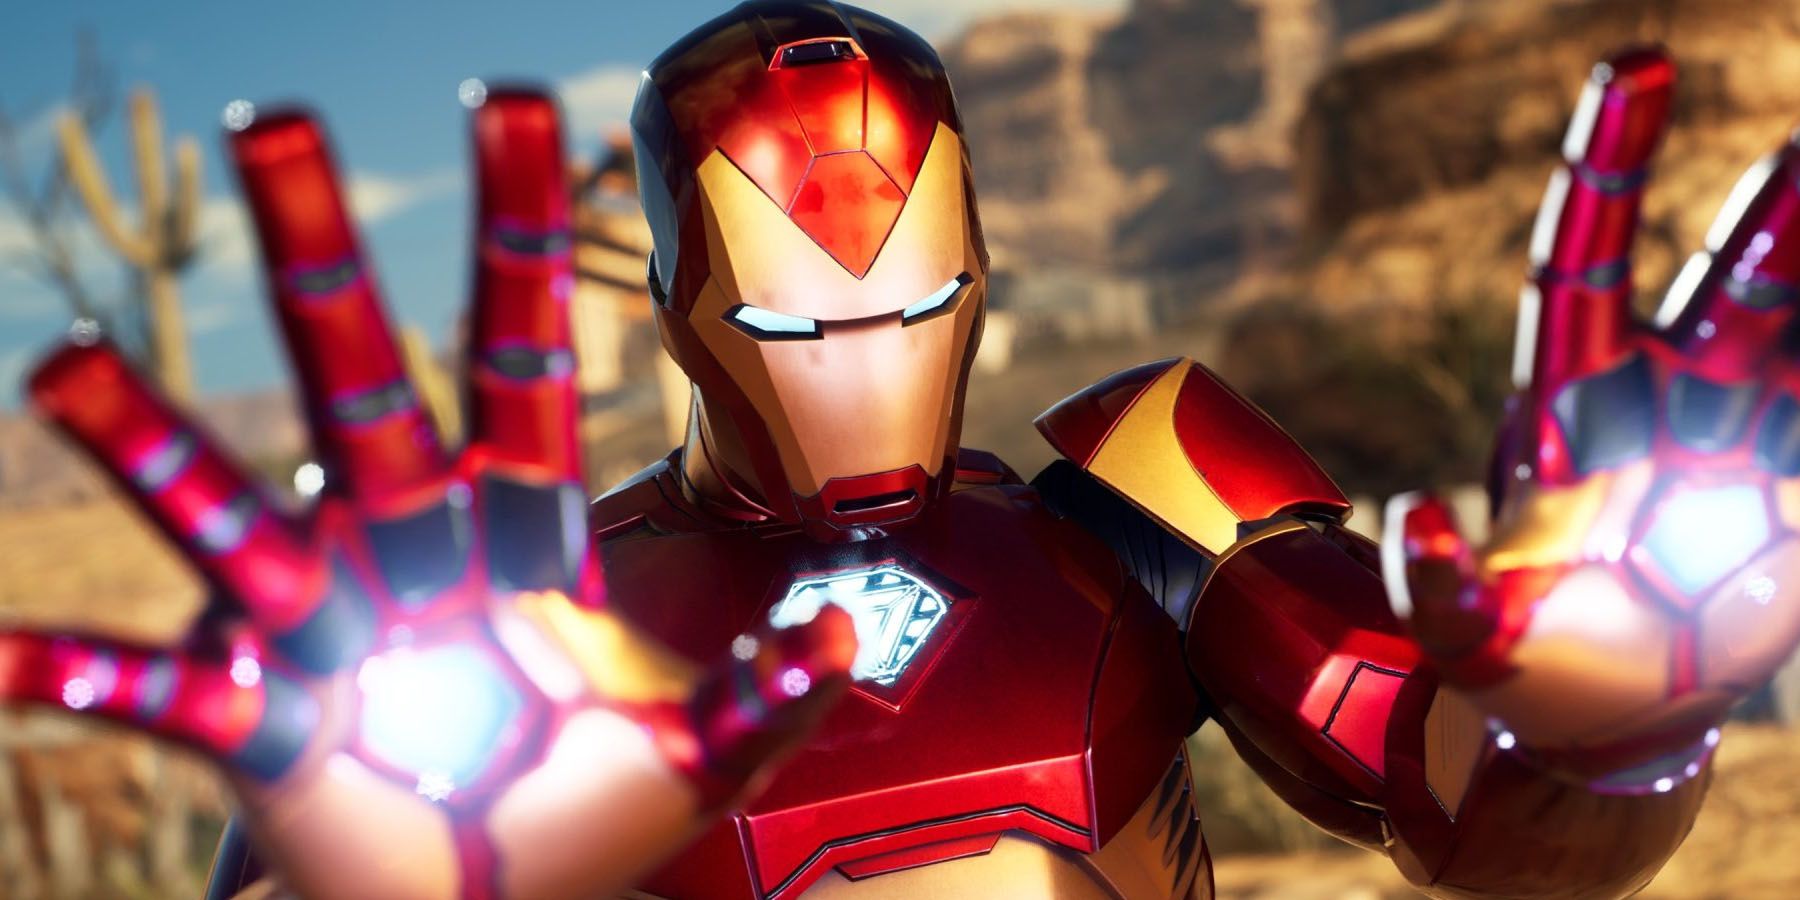 A screenshot of Iron Man readying his repulsor blasters in Marvel's Midnight Suns.